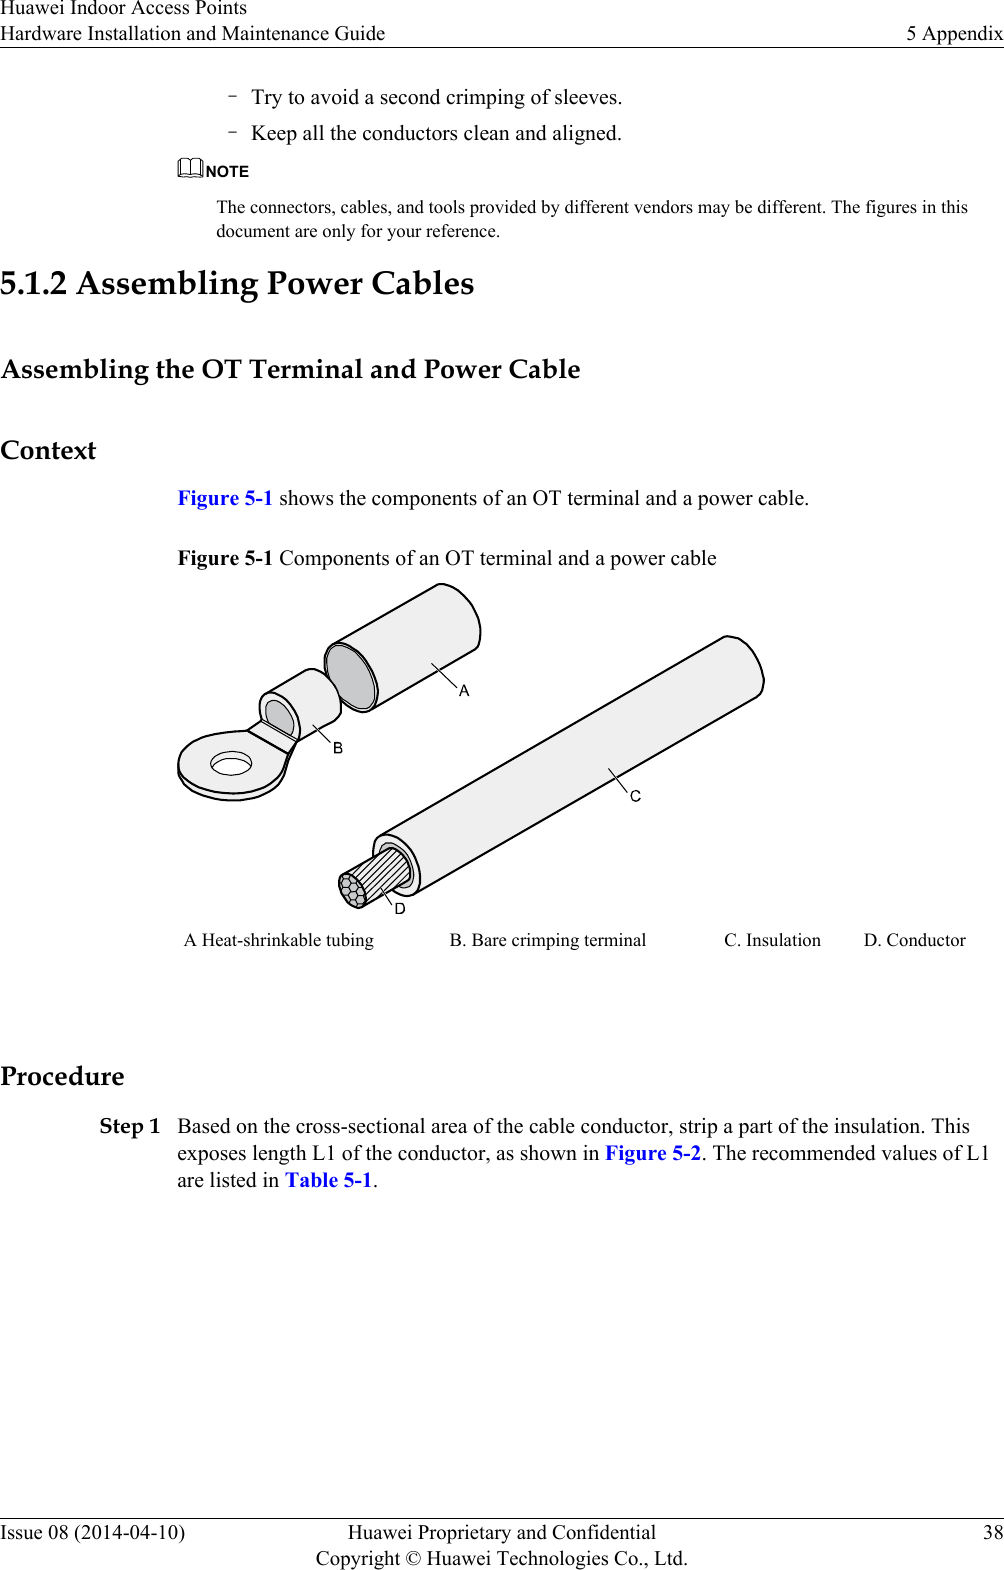 –Try to avoid a second crimping of sleeves.–Keep all the conductors clean and aligned.NOTEThe connectors, cables, and tools provided by different vendors may be different. The figures in thisdocument are only for your reference.5.1.2 Assembling Power CablesAssembling the OT Terminal and Power CableContextFigure 5-1 shows the components of an OT terminal and a power cable.Figure 5-1 Components of an OT terminal and a power cableA Heat-shrinkable tubing B. Bare crimping terminal C. Insulation D. Conductor ProcedureStep 1 Based on the cross-sectional area of the cable conductor, strip a part of the insulation. Thisexposes length L1 of the conductor, as shown in Figure 5-2. The recommended values of L1are listed in Table 5-1.Huawei Indoor Access PointsHardware Installation and Maintenance Guide 5 AppendixIssue 08 (2014-04-10) Huawei Proprietary and ConfidentialCopyright © Huawei Technologies Co., Ltd.38